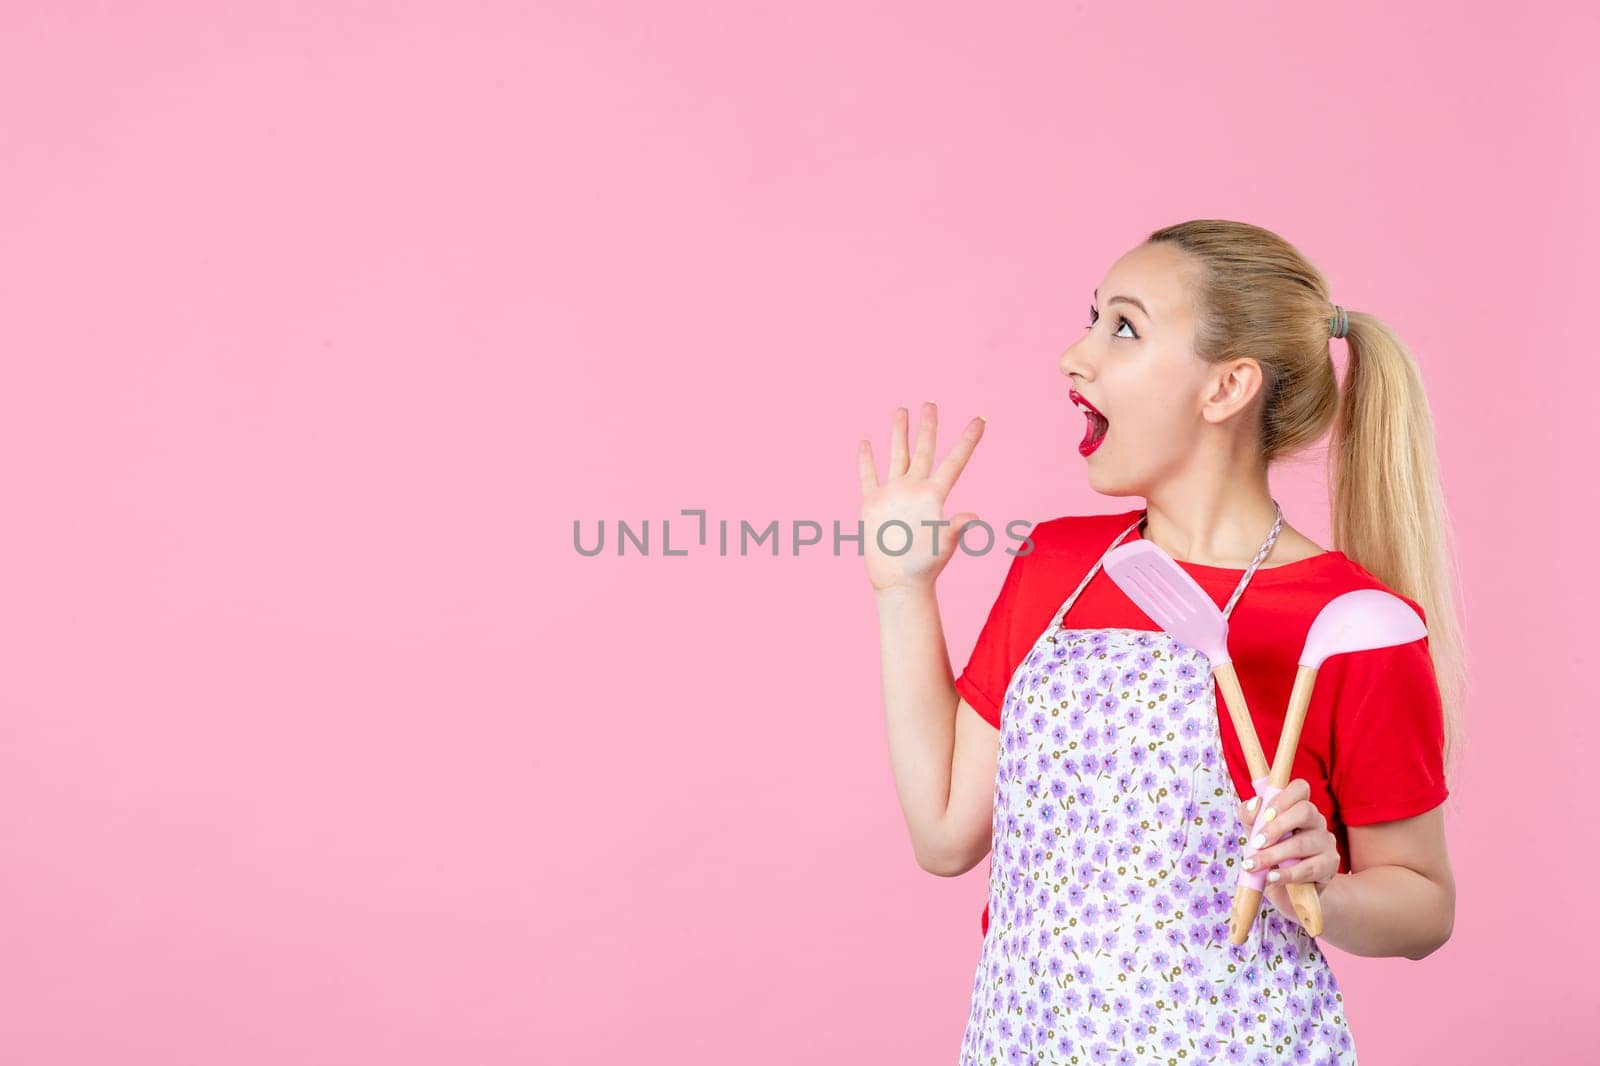 front view young housewife in cape holding spoons on pink background horizontal profession duty job worker wife uniform occupation